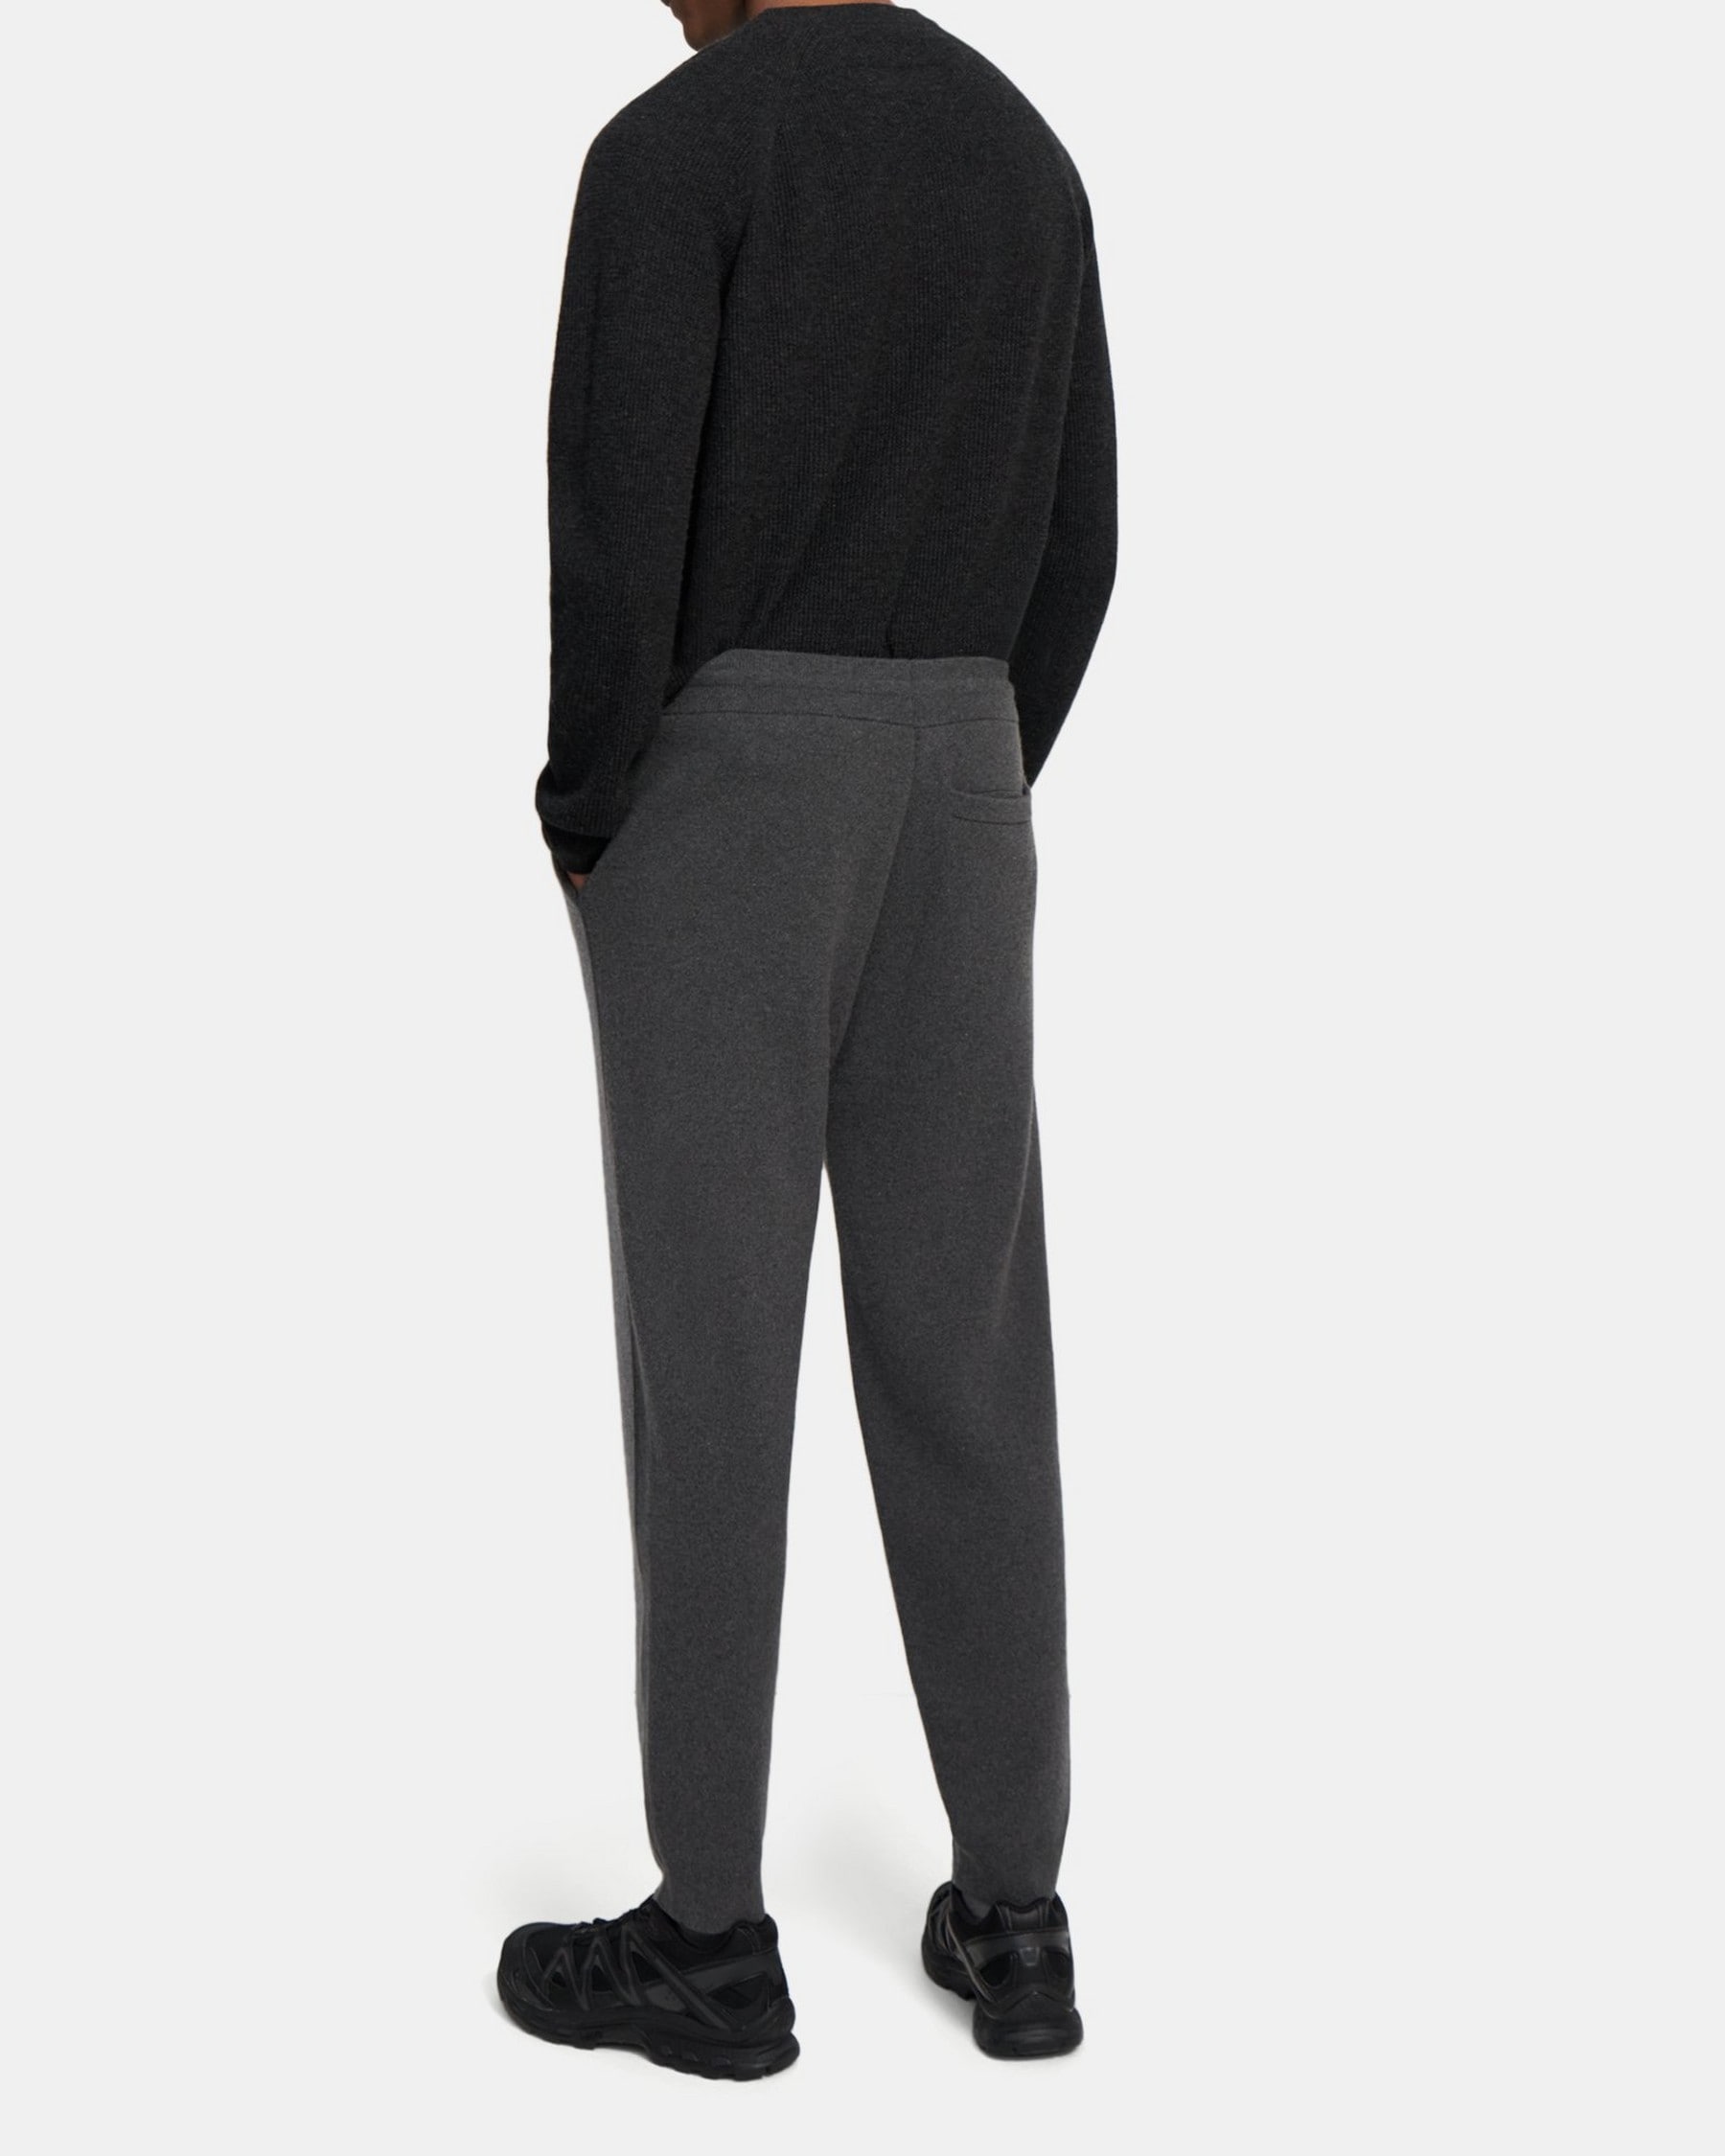 Alcos Jogger in Wool-Cashmere